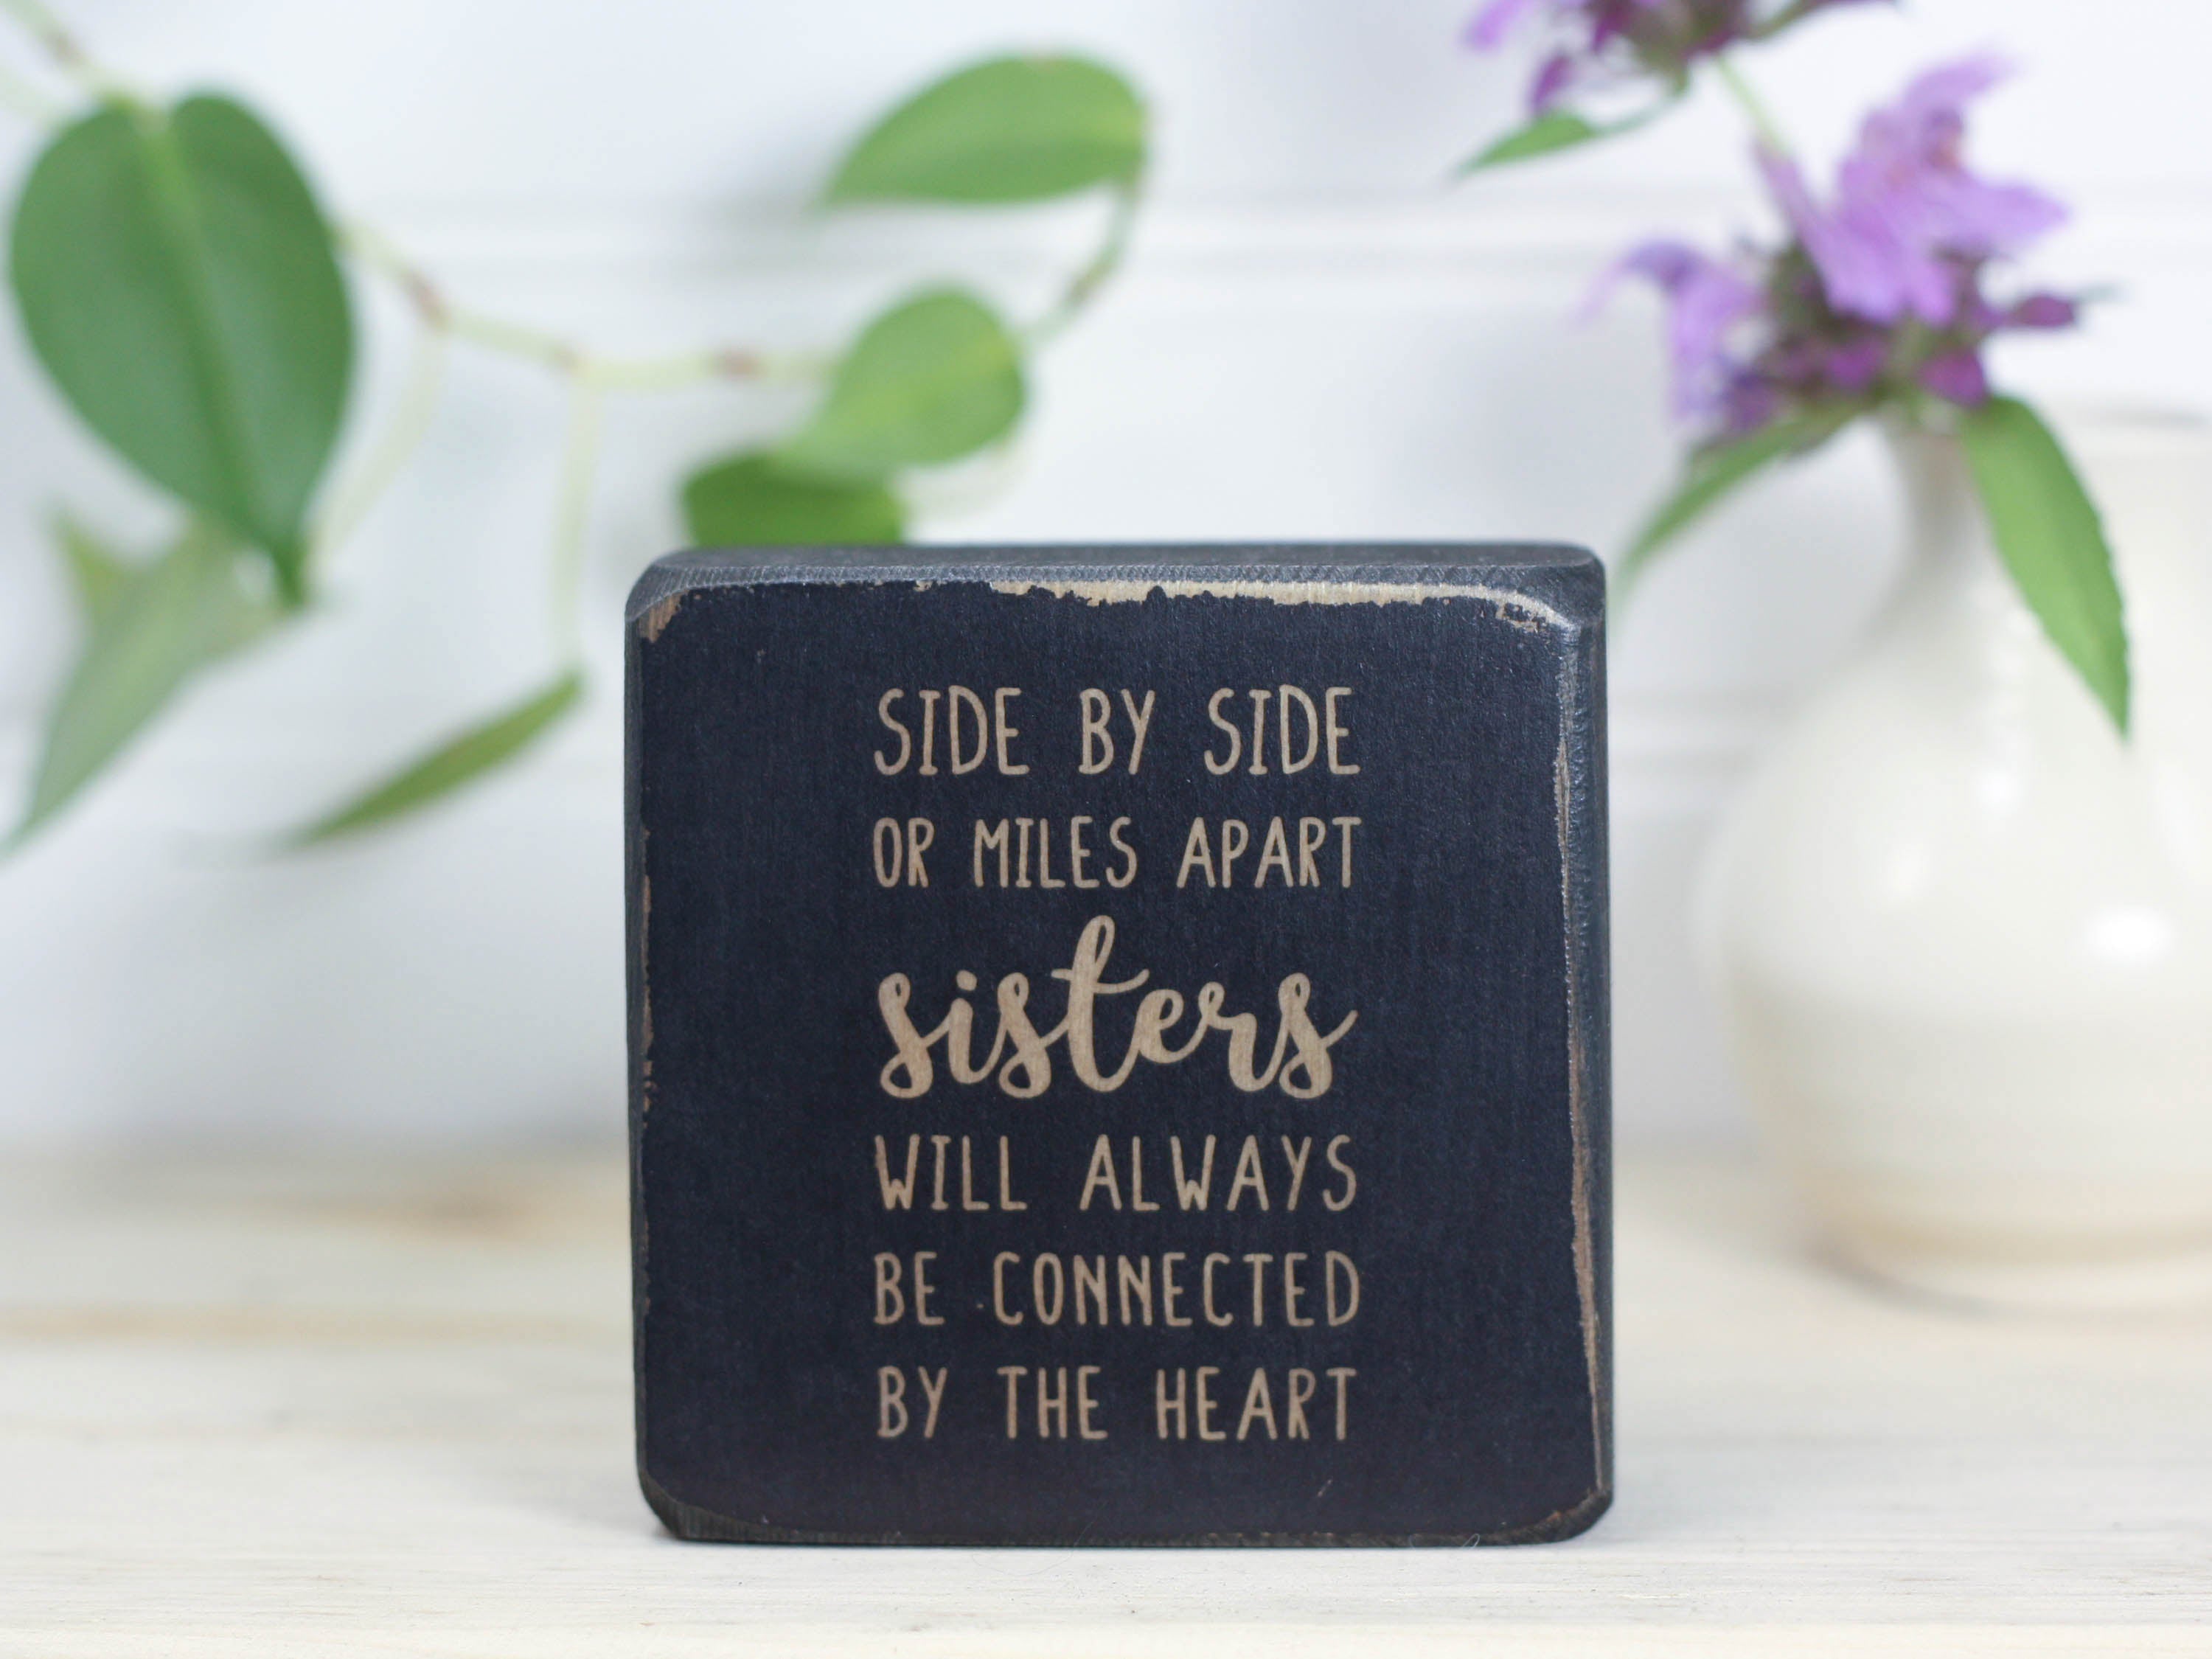 Small wood block with sister quote in distressed black that reads "Side by side or miles apart sisters will always be connected by the heart."